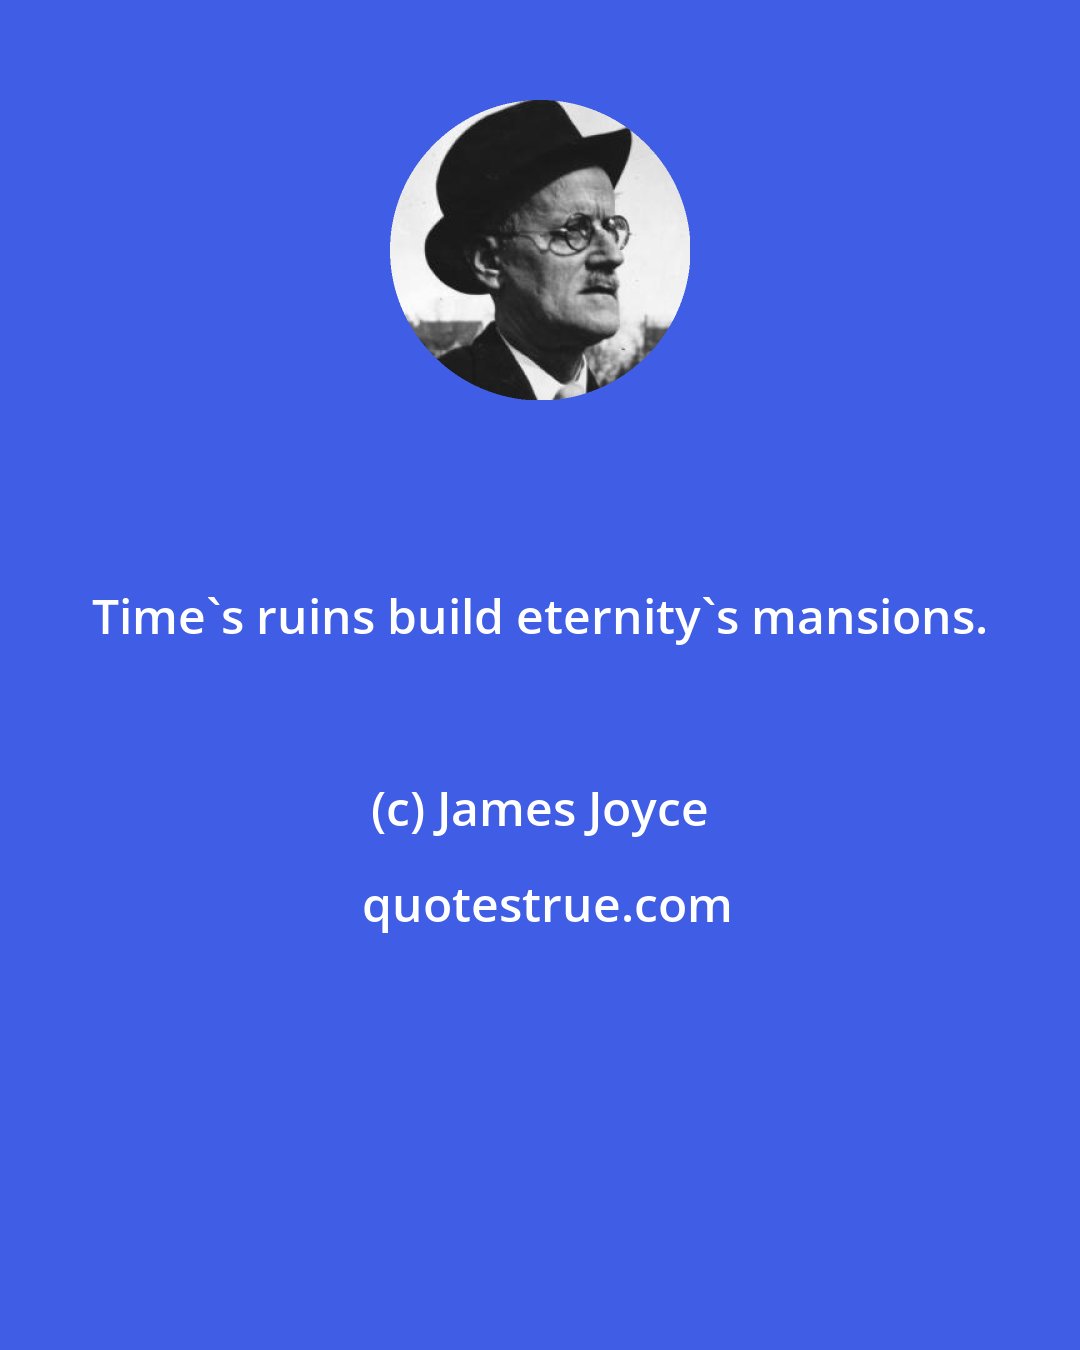 James Joyce: Time's ruins build eternity's mansions.